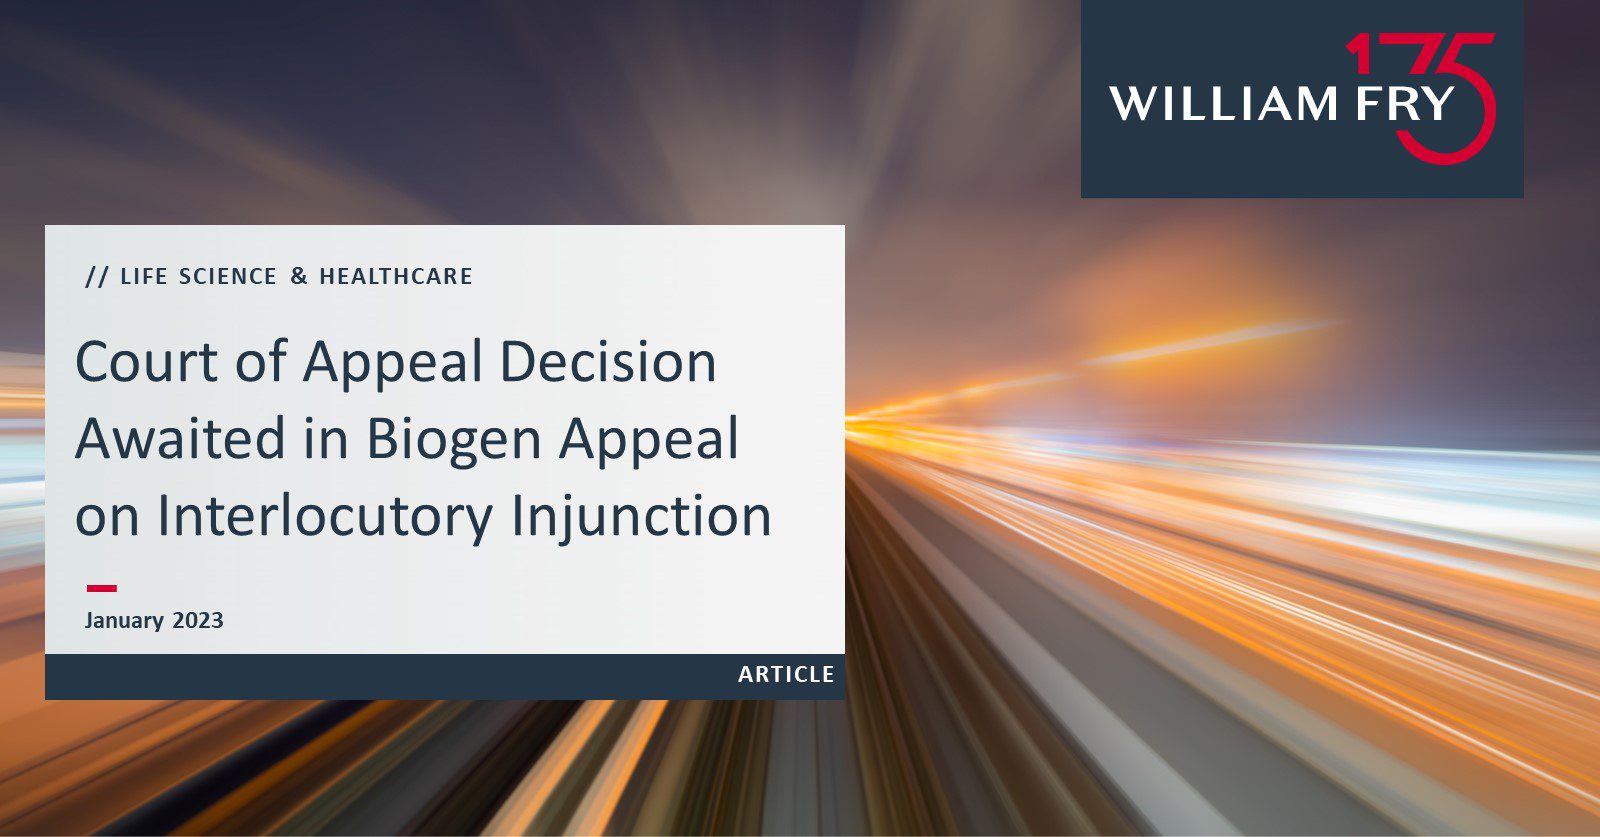 Court of Appeal Decision Awaited in Biogen Appeal on Interlocutory Injunction